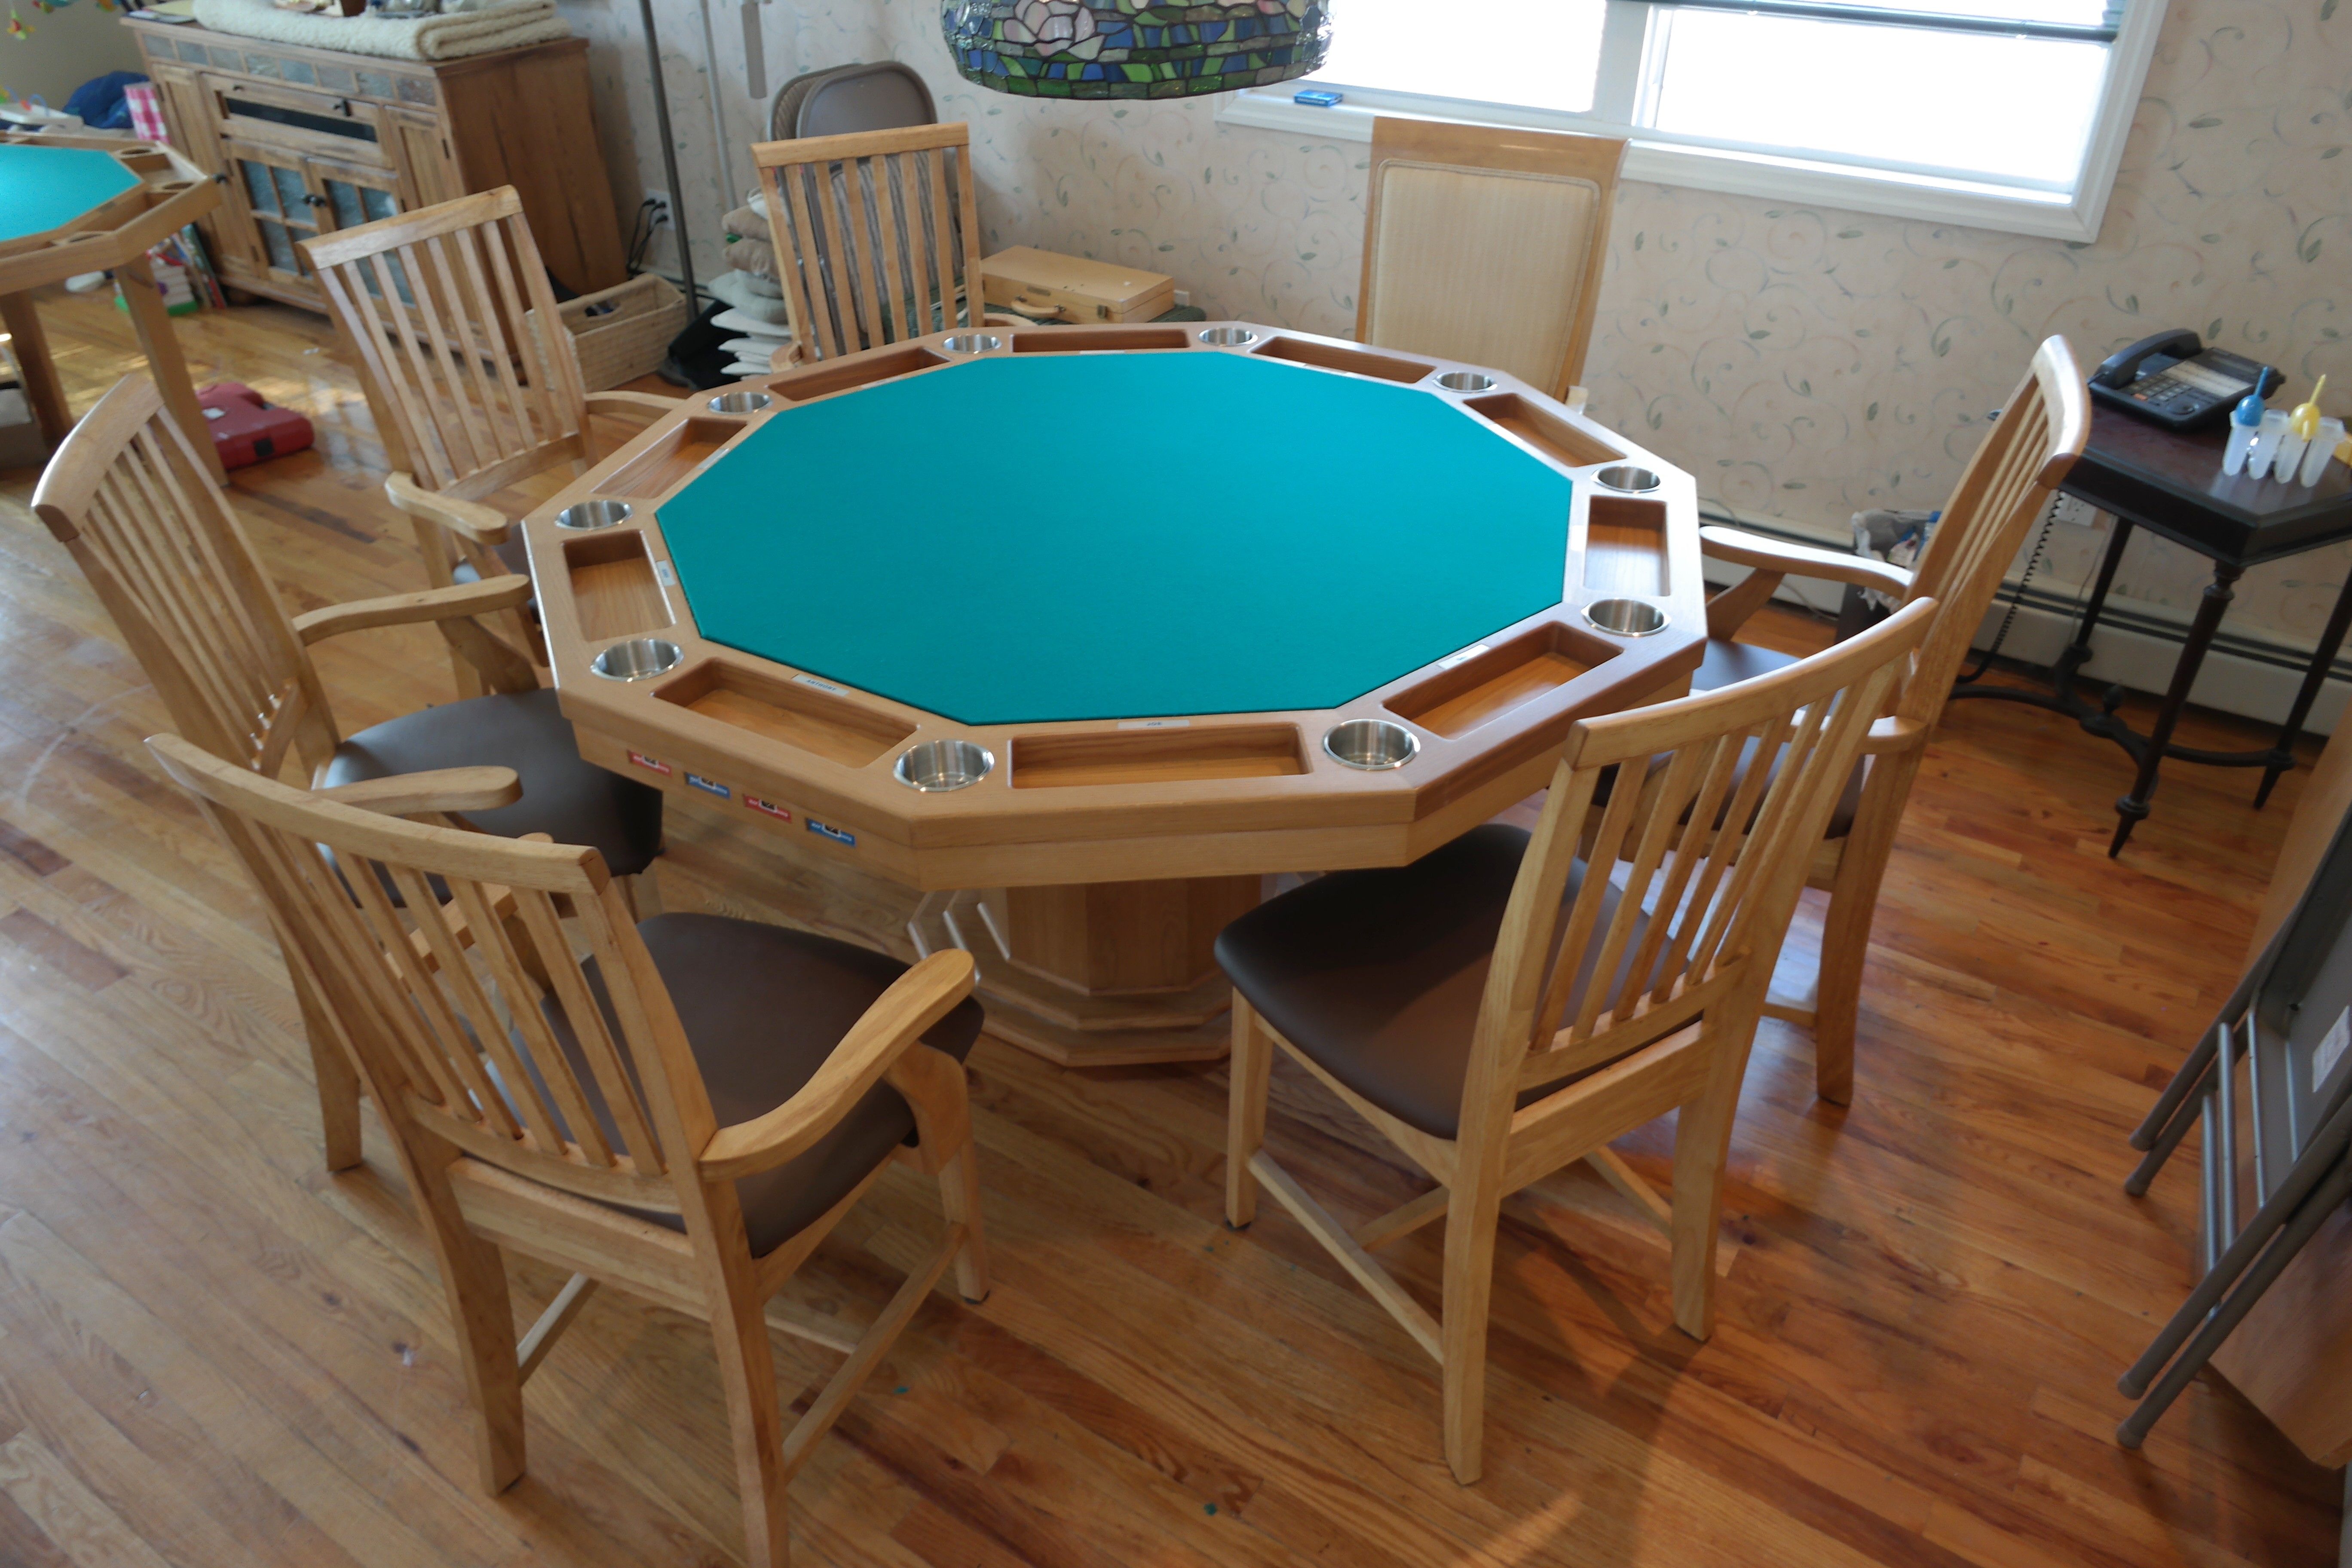 kitchen table that converts to a poker table